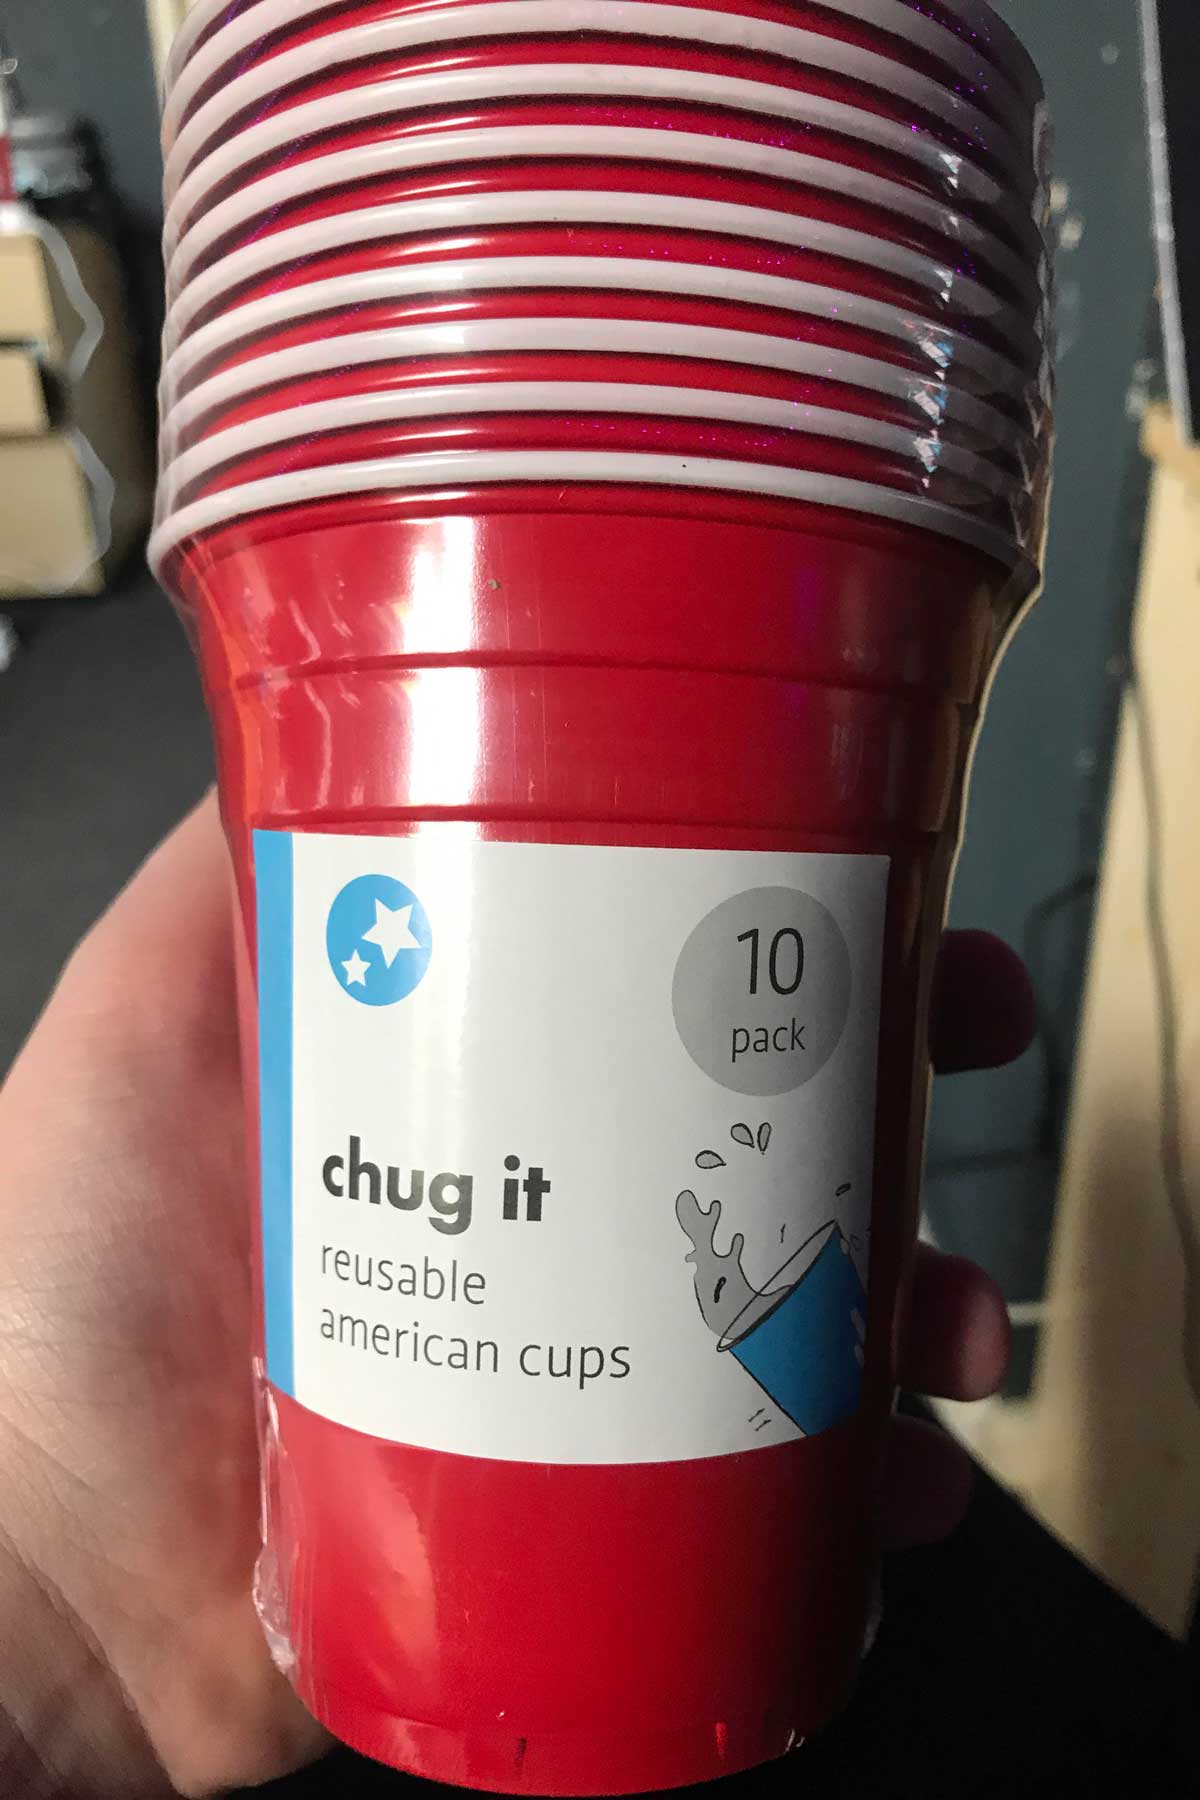 American cups